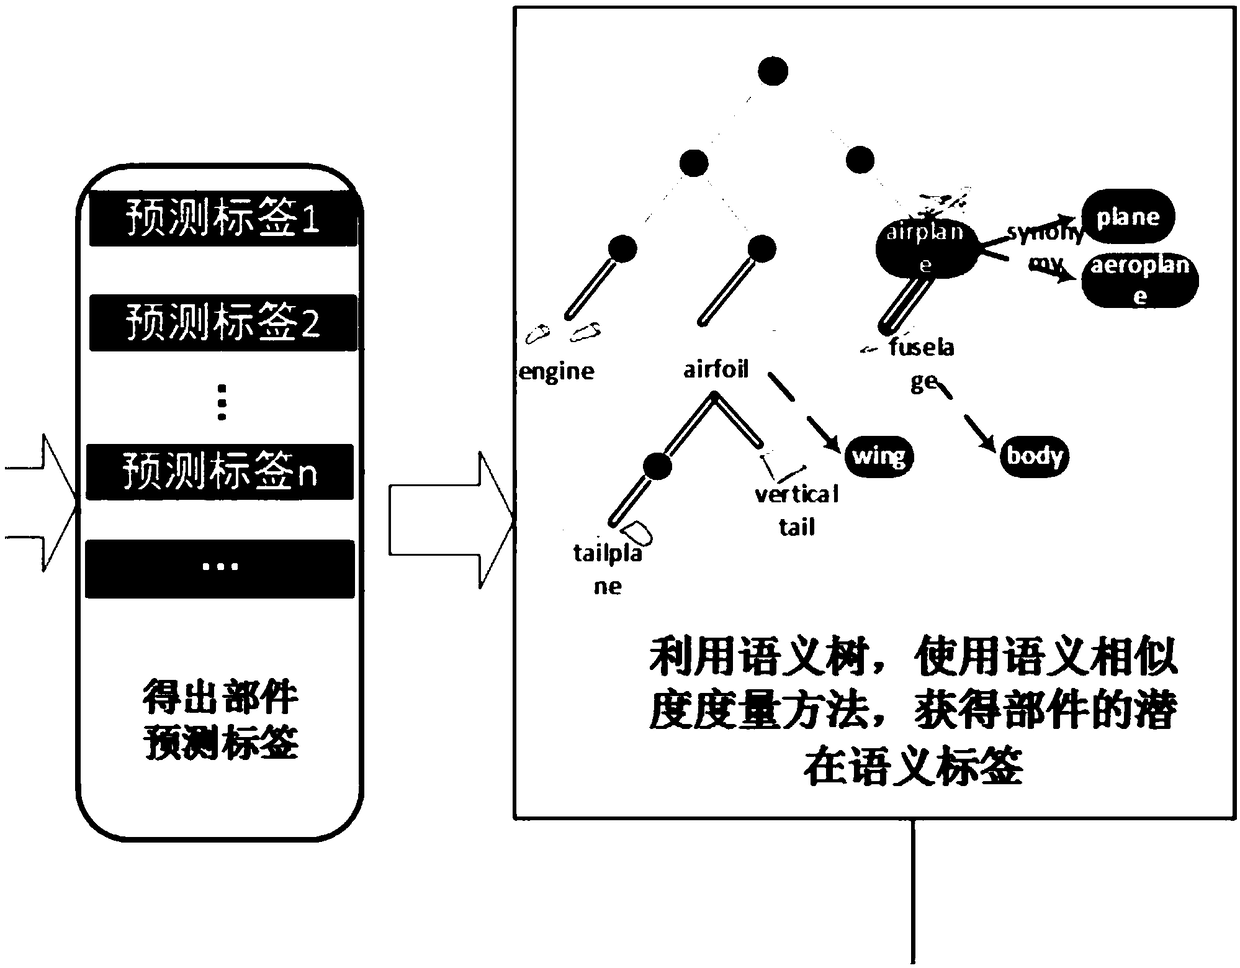 A sketch recognition method and an application of the method in commodity retrieval